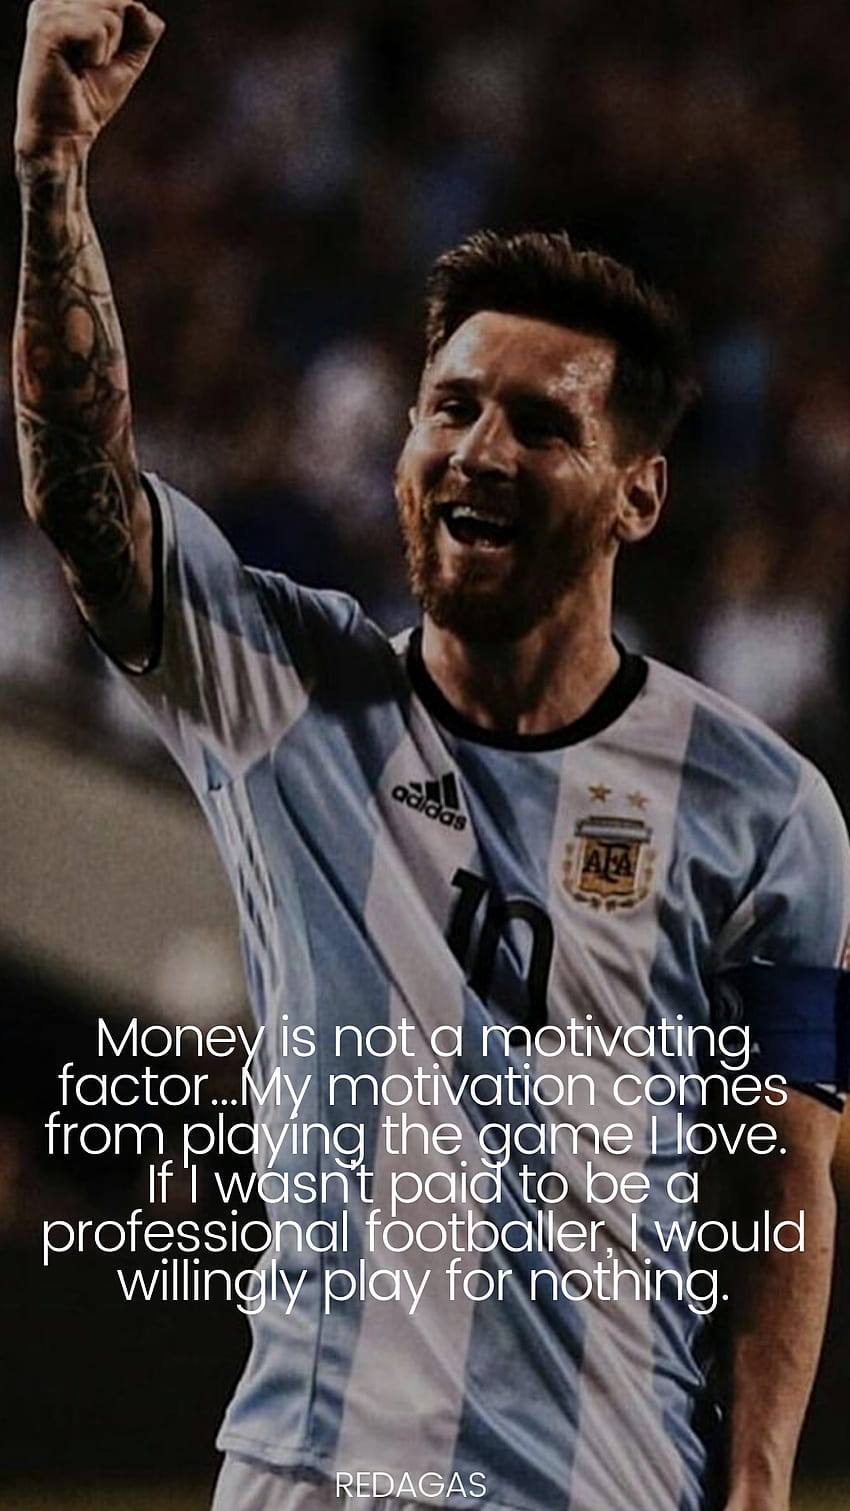 Lionel Messi Quotes With HD Images 10 Powerful Sayings by Barcelona Great  on Success and Life to Celebrate His 33rd Birthday   LatestLY